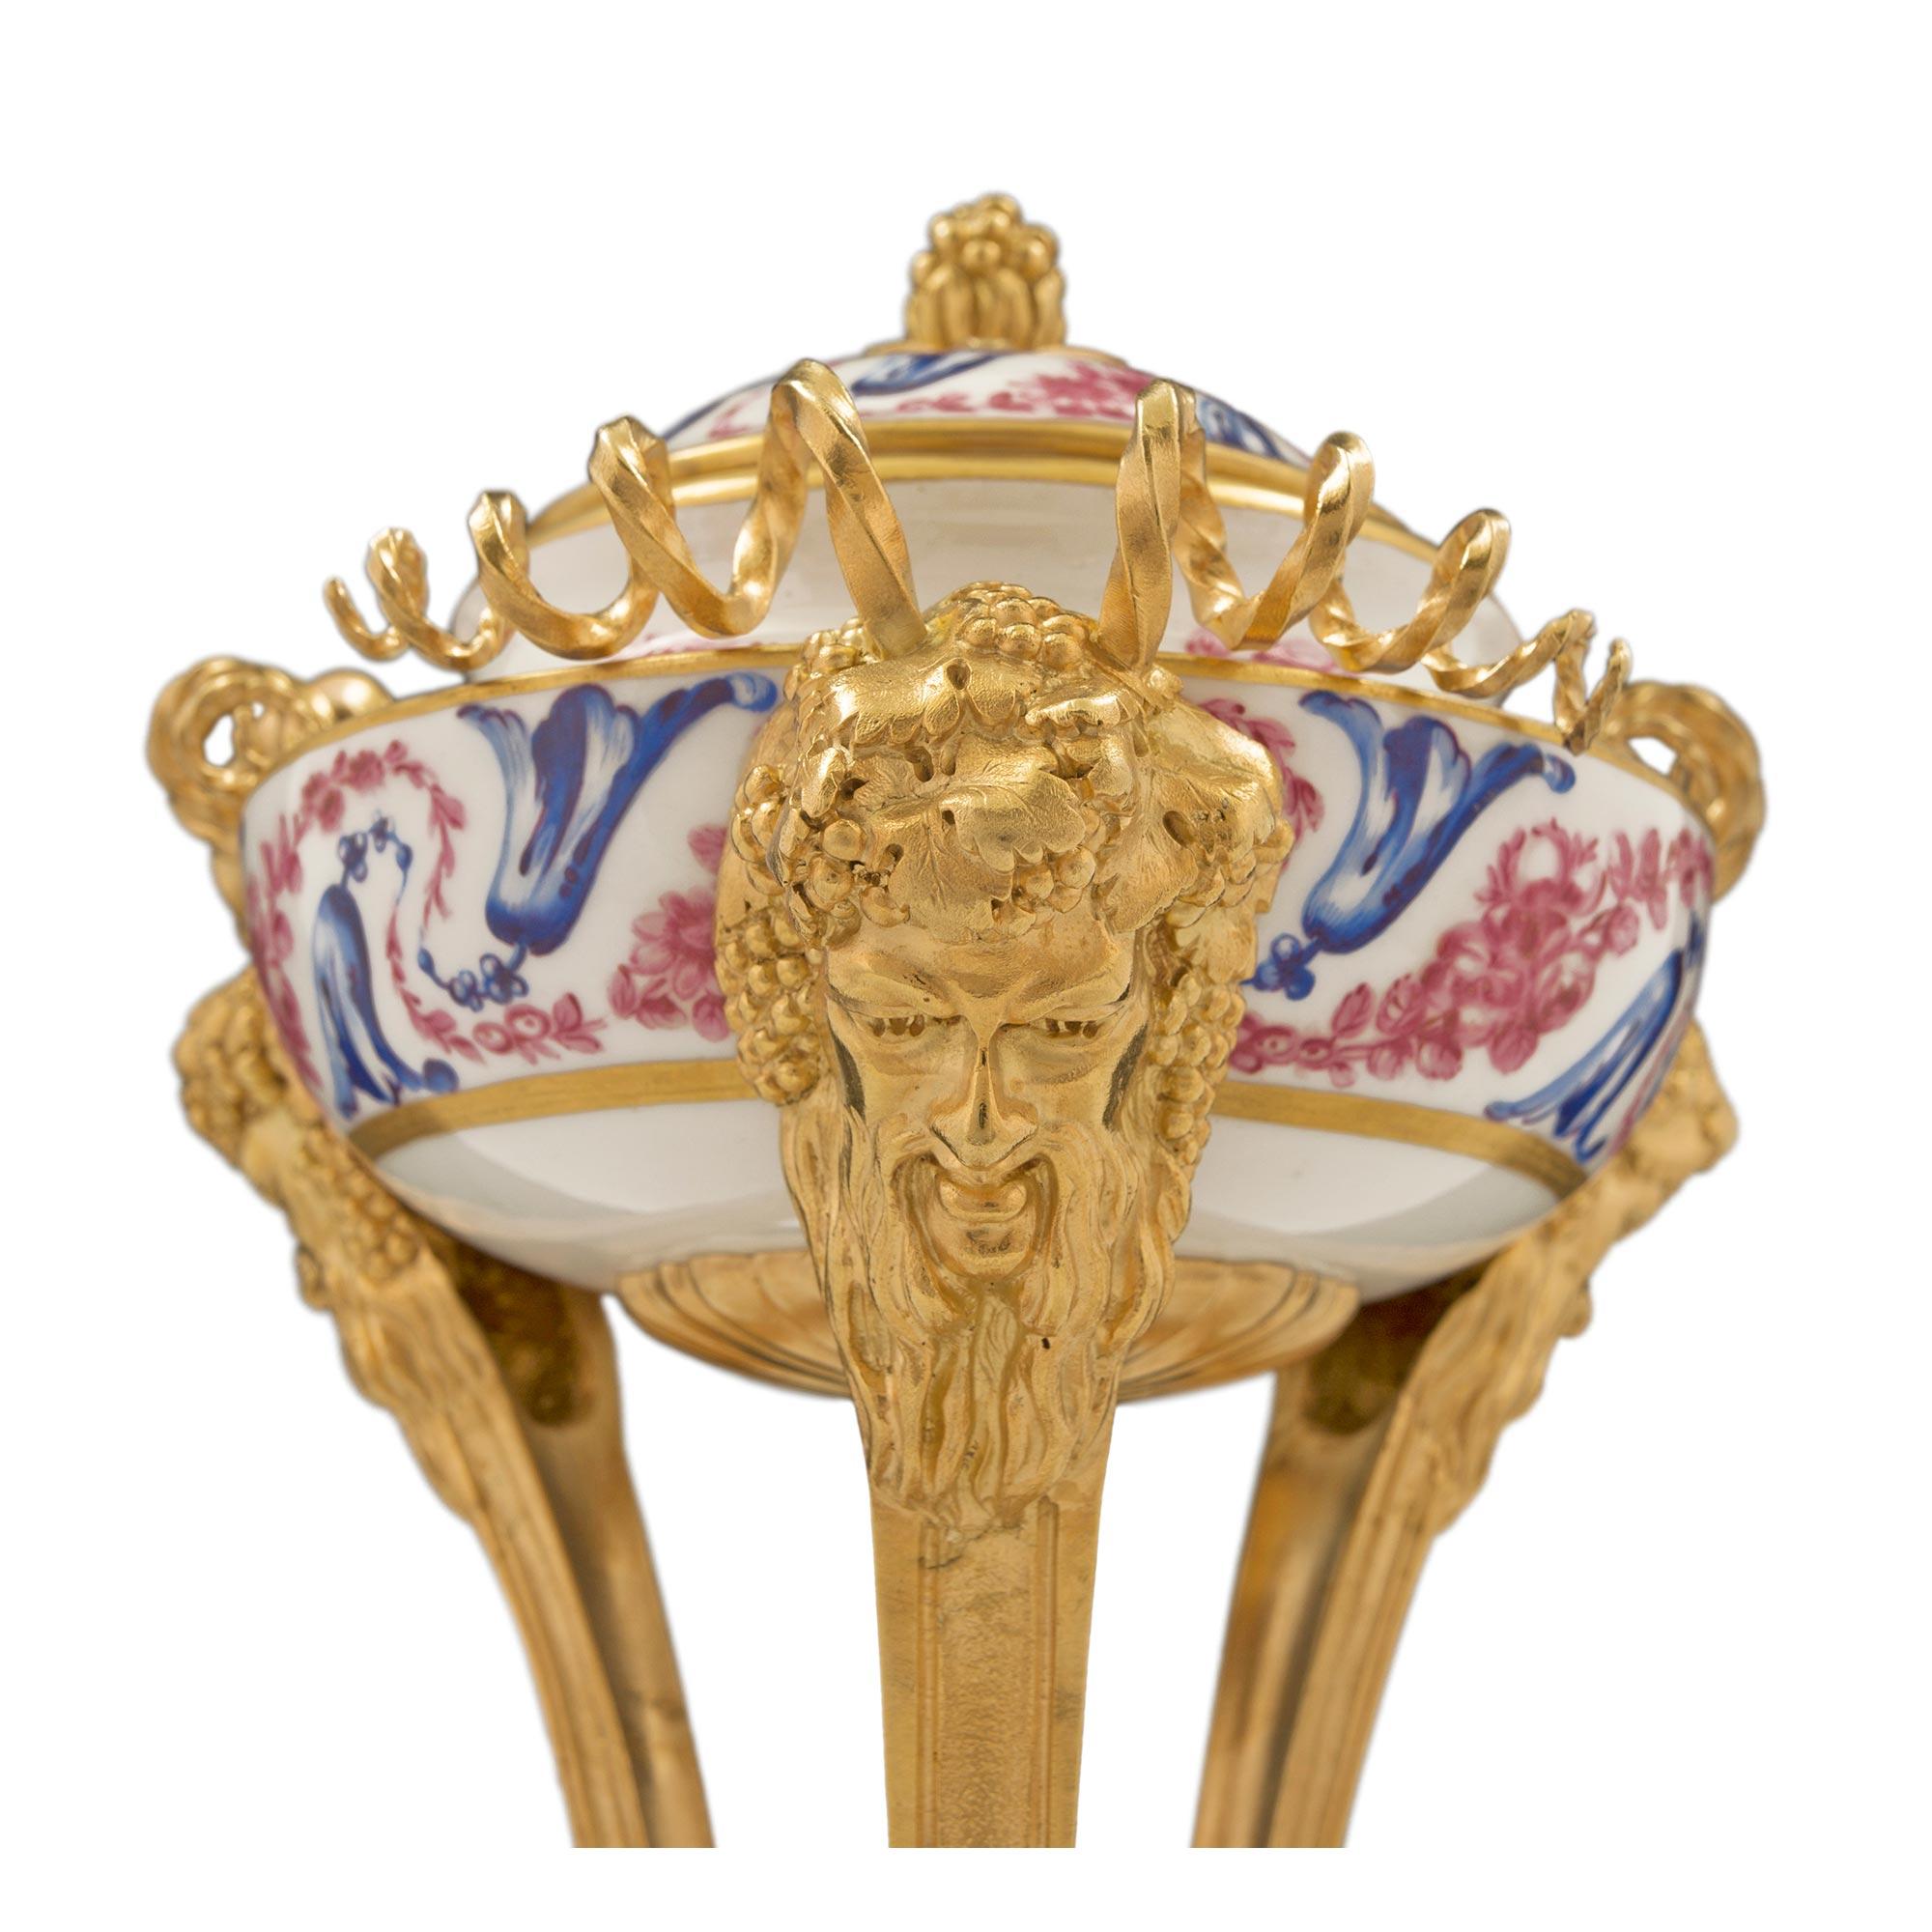 Pair of French 19th Century Louis XVI St. Sèvres Porcelain and Ormolu Lidded Urn For Sale 2